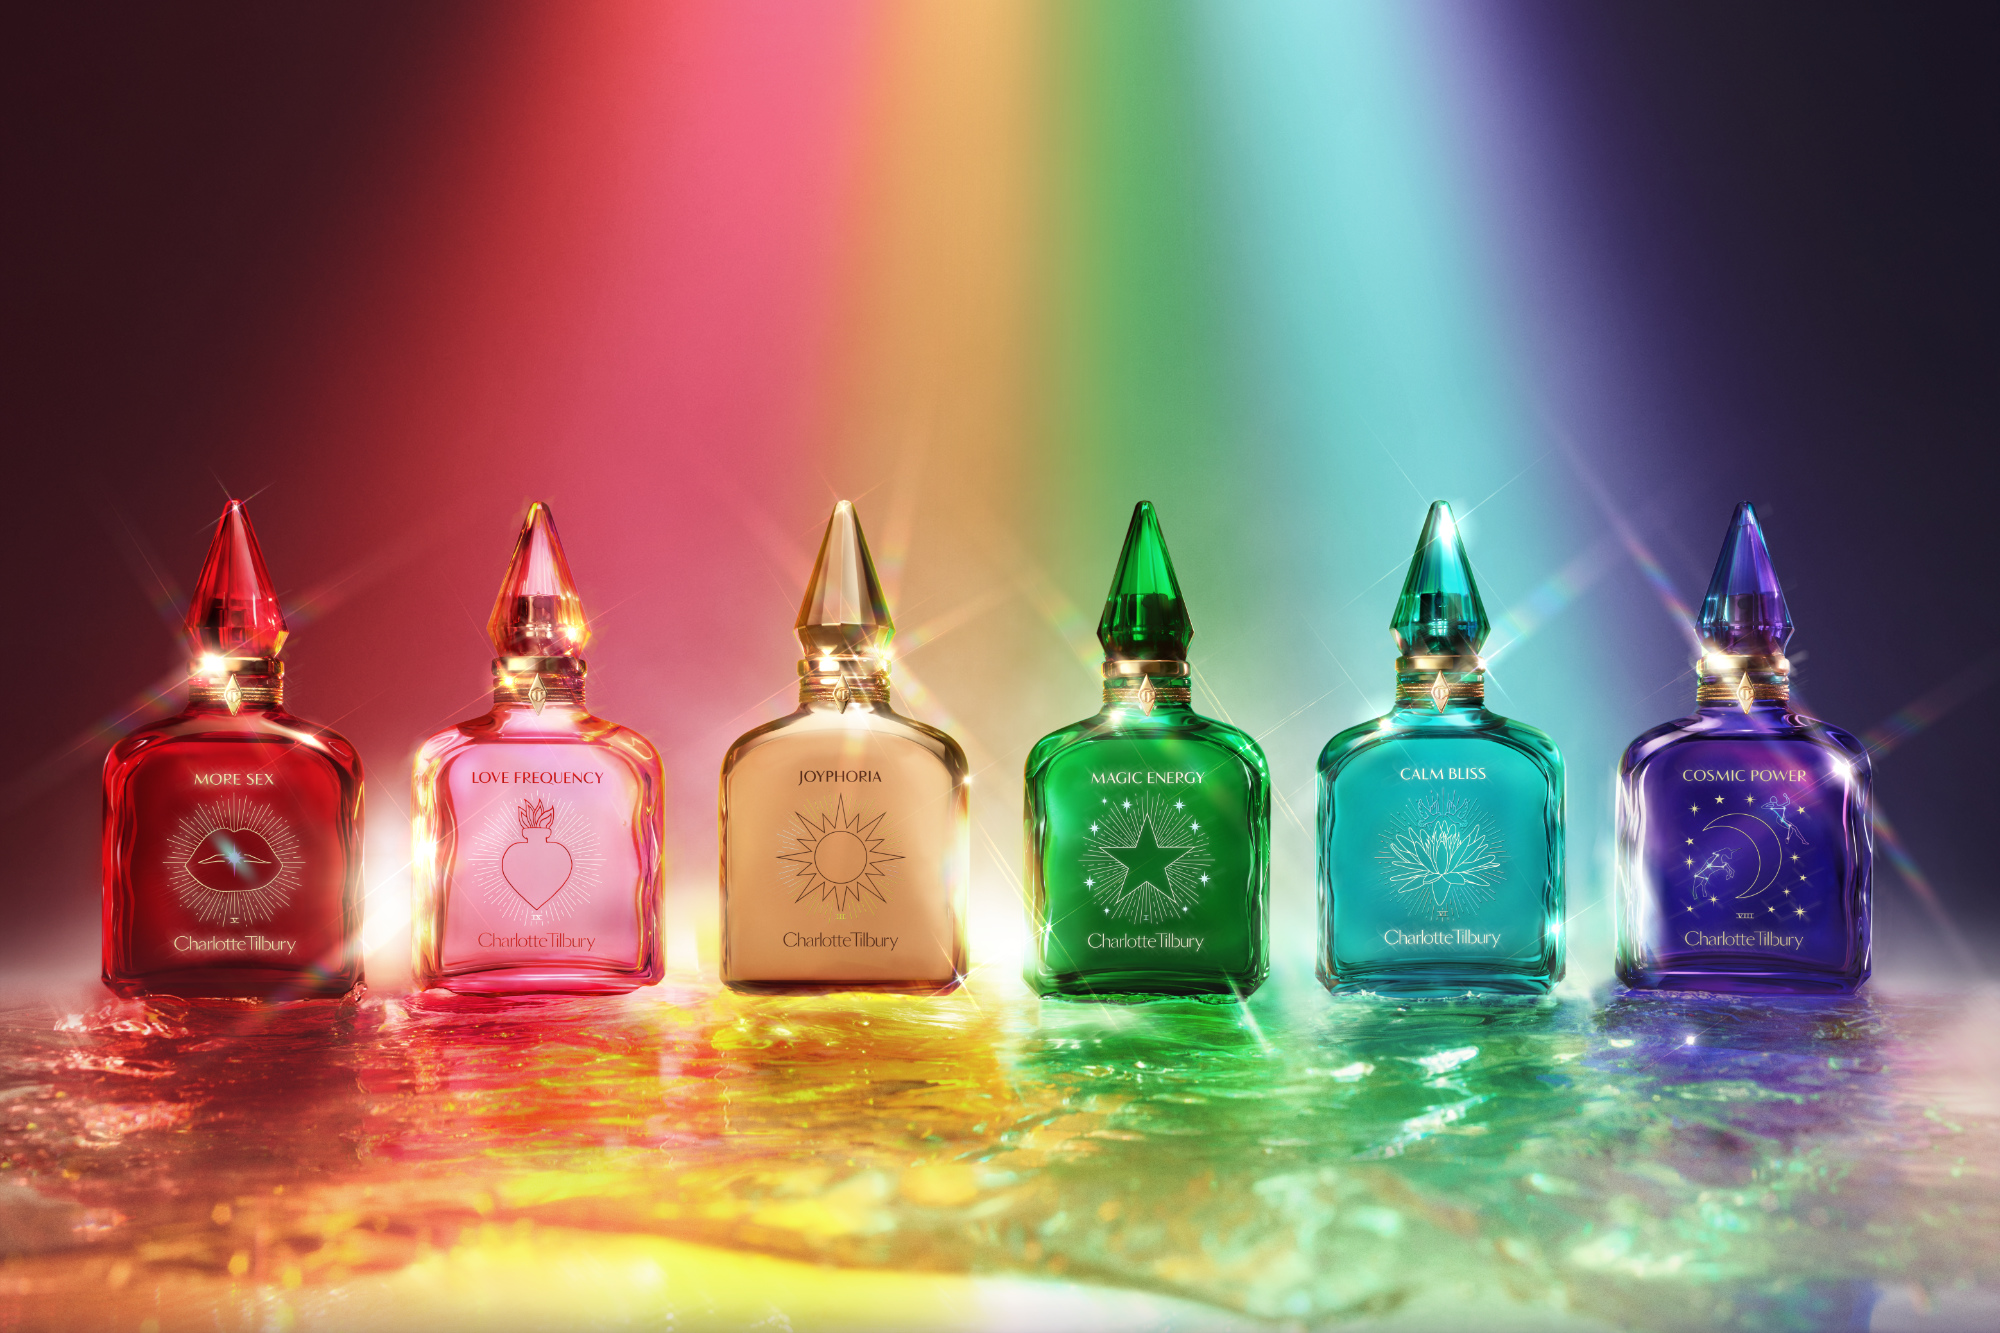 Charlotte Tilbury Fragrance Perfume Collection of Emotions